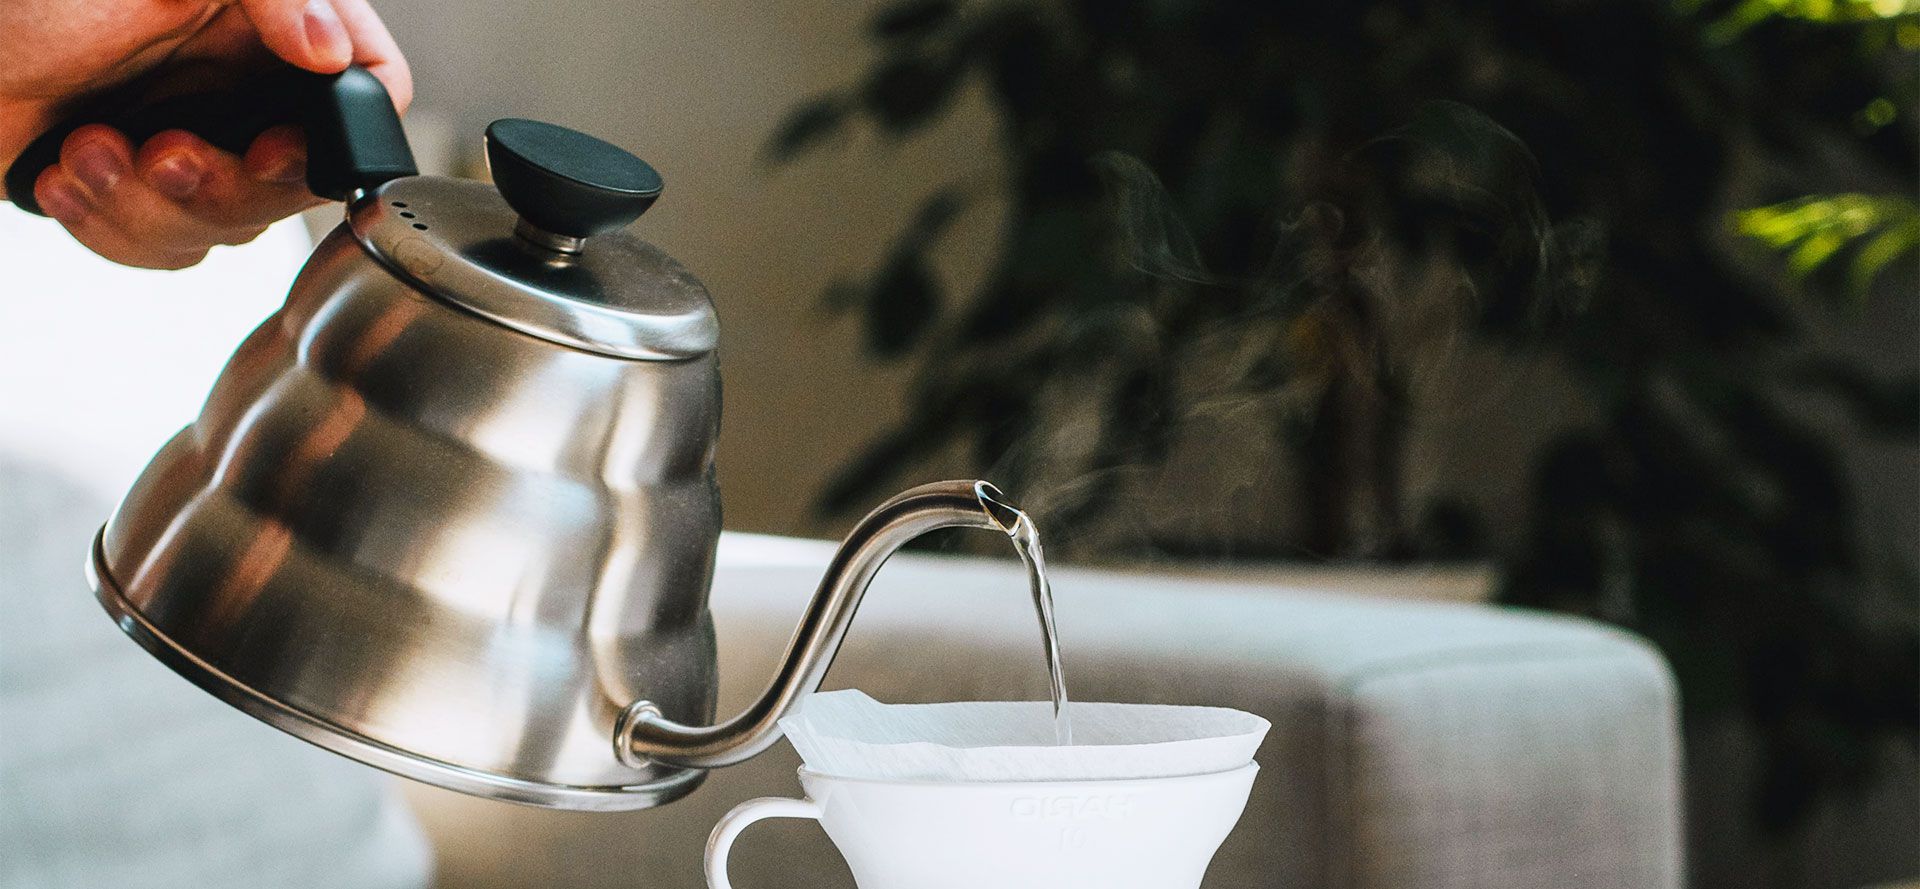 Gooseneck Kettle For Stove Top.